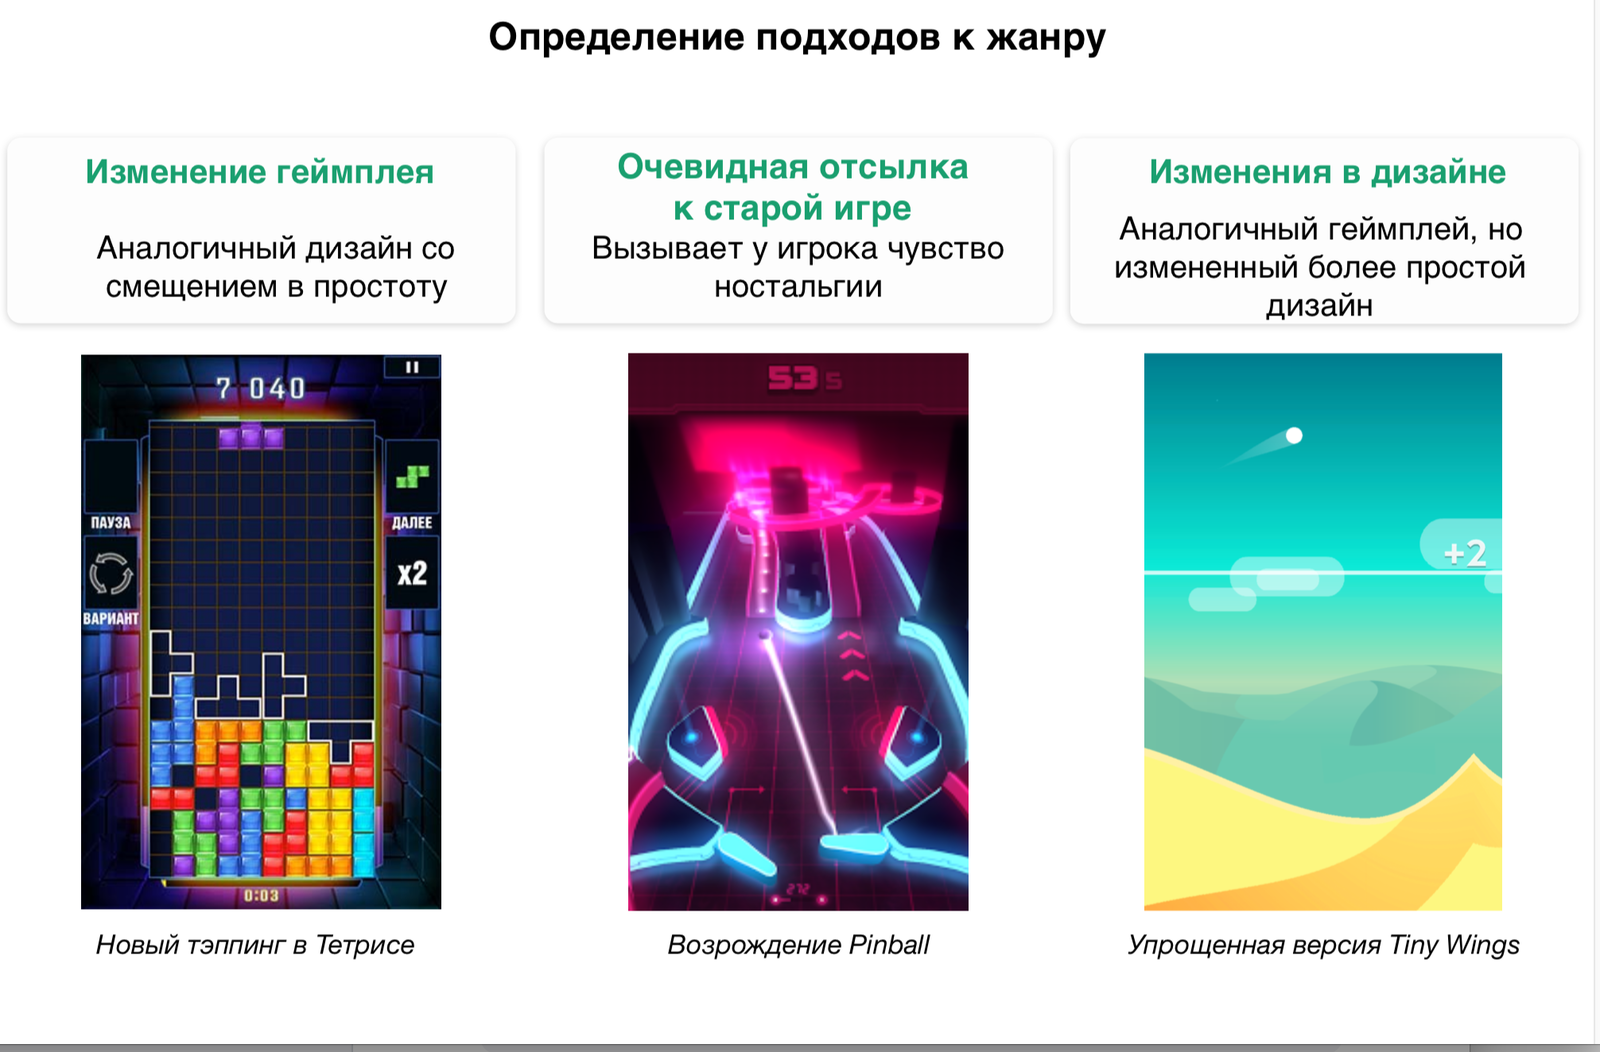 Issue 3. New - long forgotten old - My, Mobile games, Gamedev, Classic, Nostalgia, Remake, Casual games, Инди, Longpost